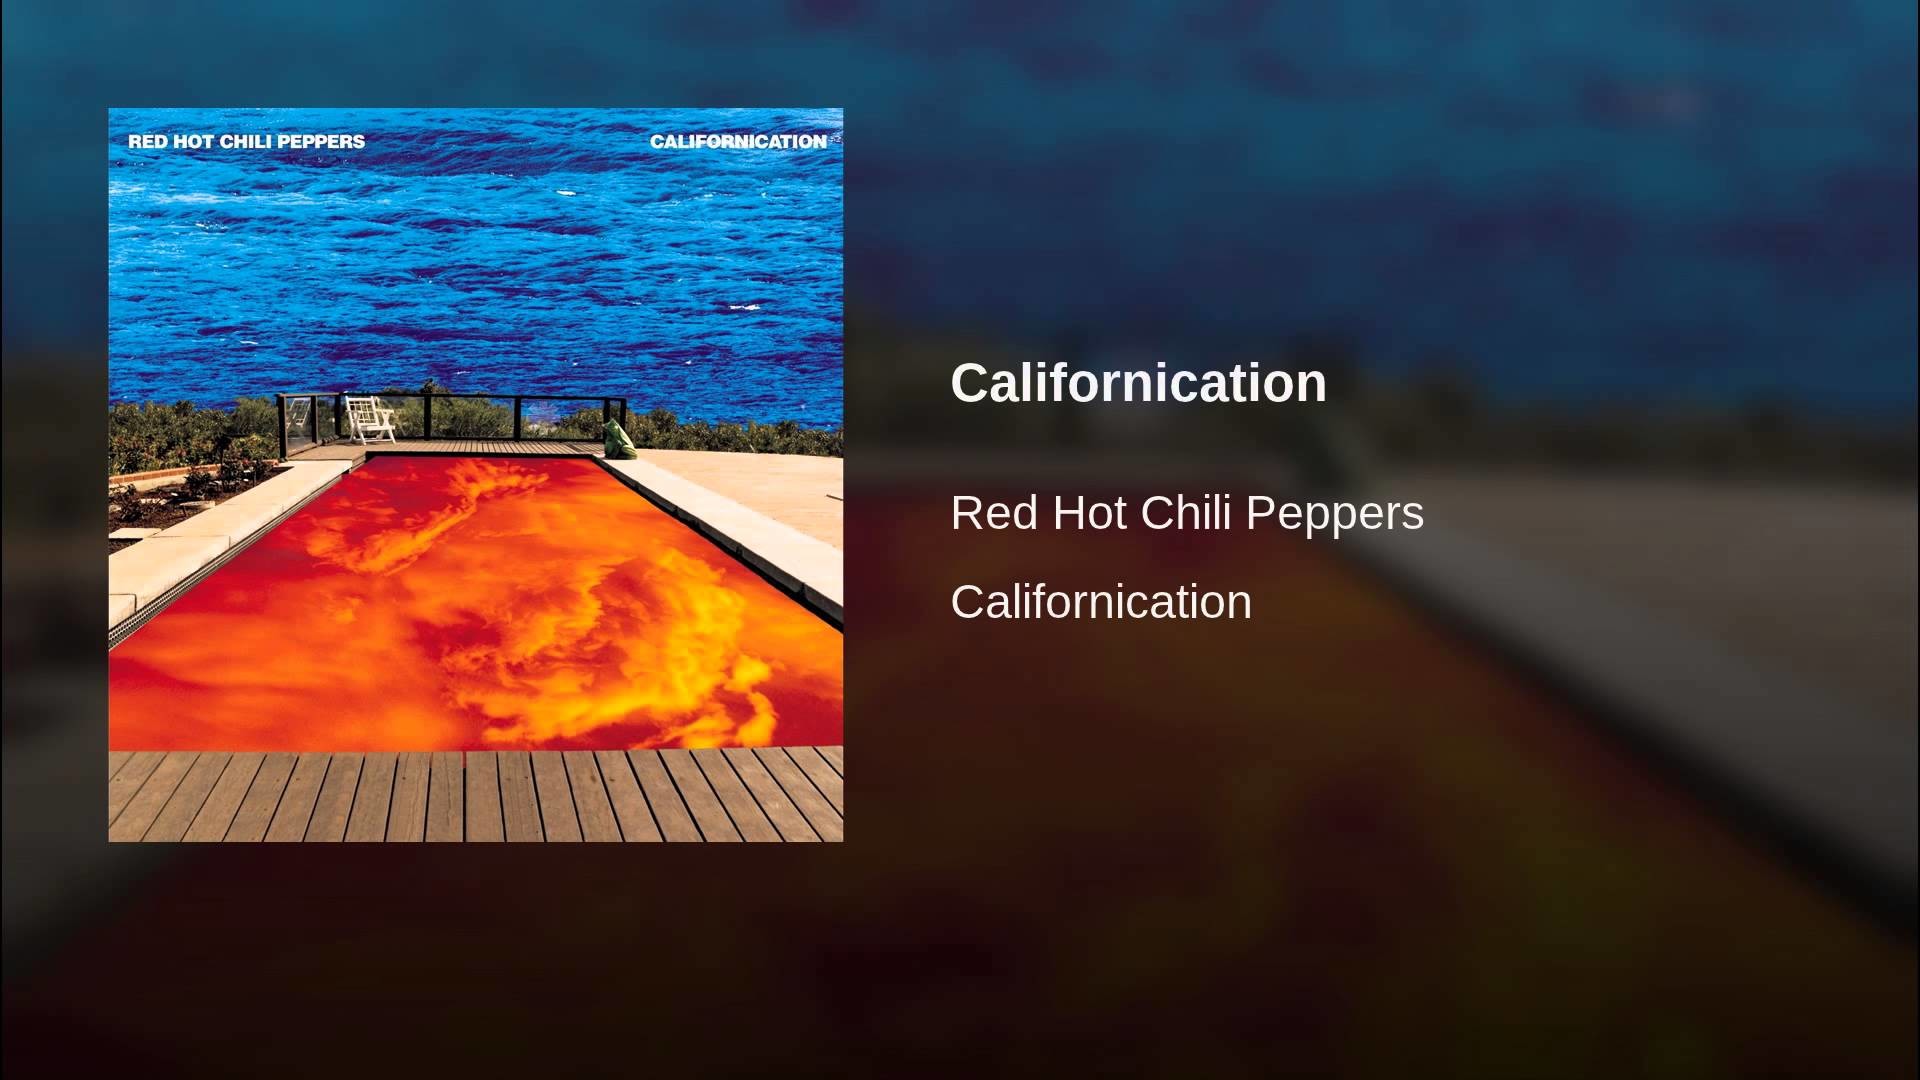 Peppers scar. Parallel Universe Red hot Chili Peppers. Red hot Chili Peppers Californication. Californication Red hot Chili Peppers слова. Red hot Chili Peppers Californication клип.